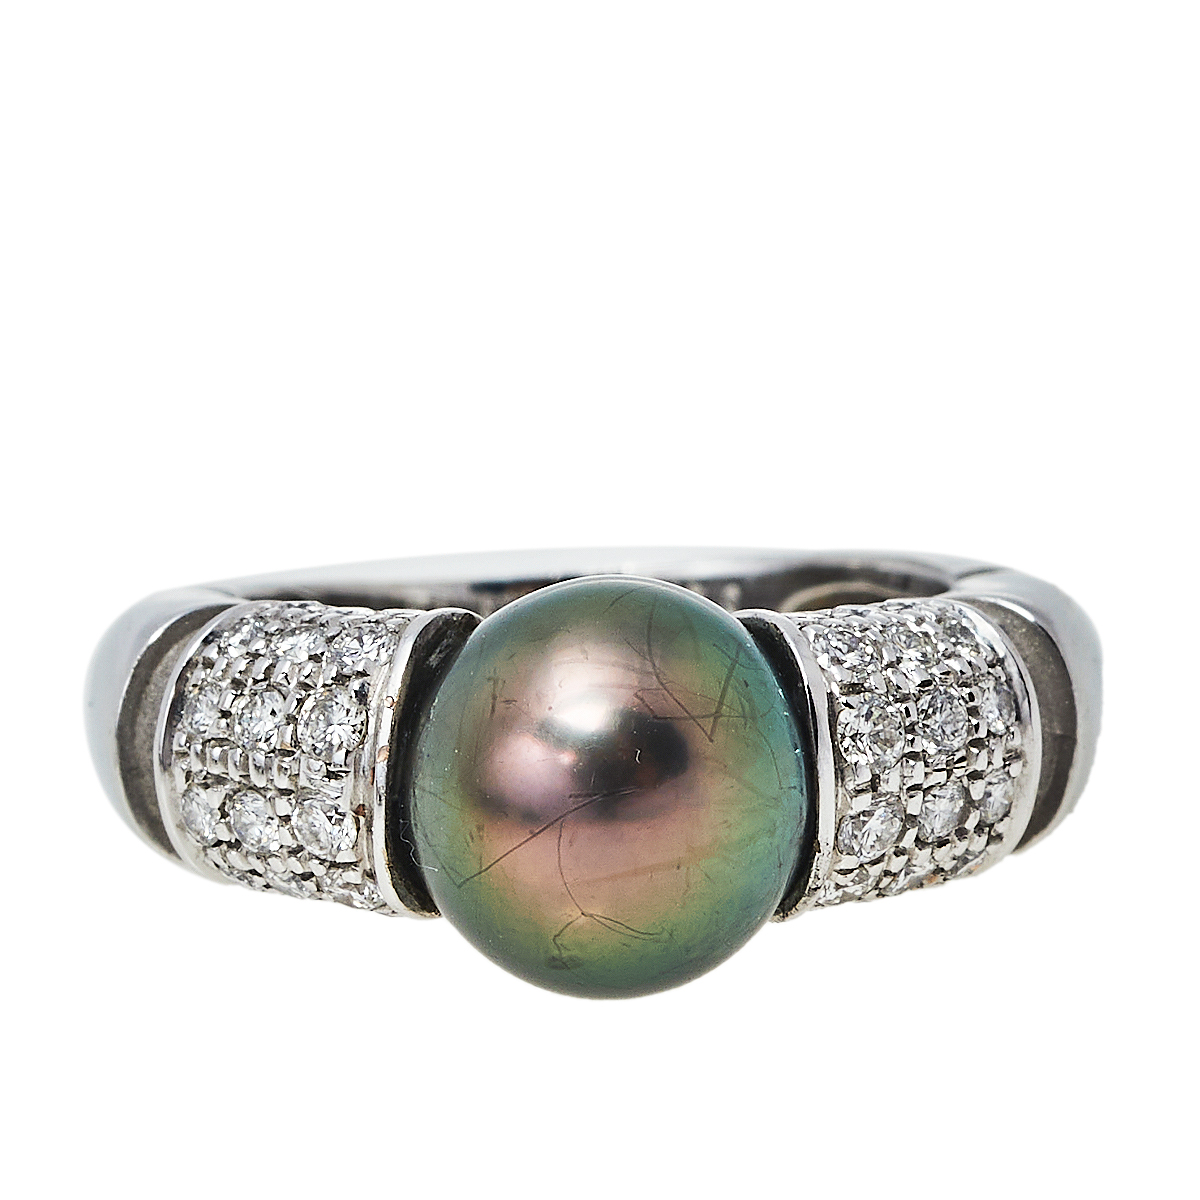 Mauboussin Nadja Cultured Pearl Diamond 18K White Gold Cocktail Ring Size 52